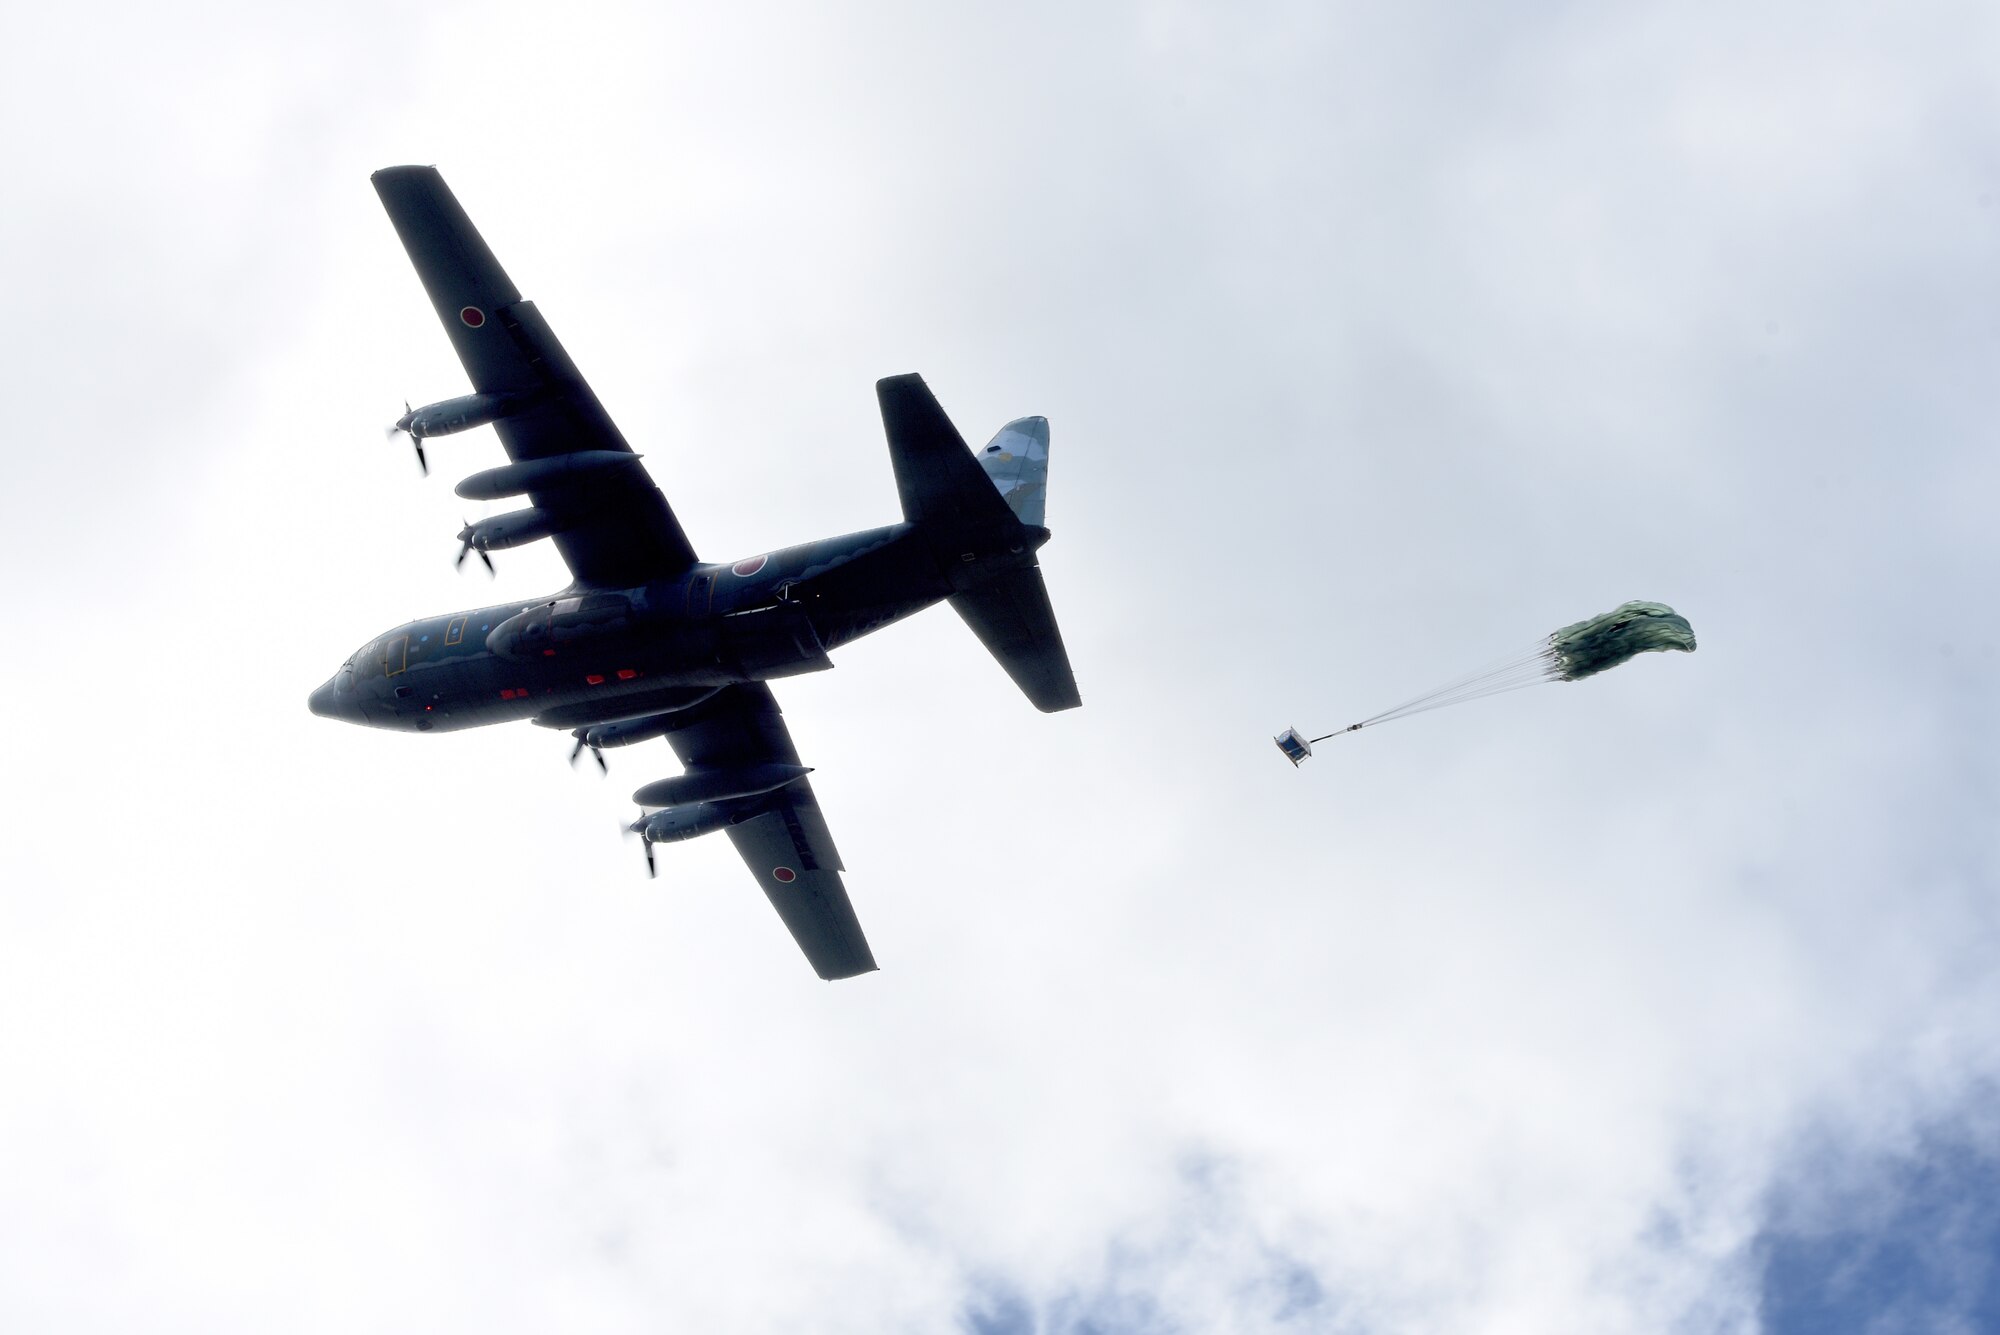 A Japan Air Self-Defense Force C-130 Hercules conducts for an airdrop during Exercise Cope North 17 at North Field, Tinian, Feb. 22, 2017. The exercise includes 22 total flying units and more than 2,700 personnel from three countries and continues the growth of strong, interoperable relationships within the Indo-Asia-Pacific region through integration of airborne and land-based command and control (U.S. Air Force photo by Airman 1st Class Jacob Skovo).